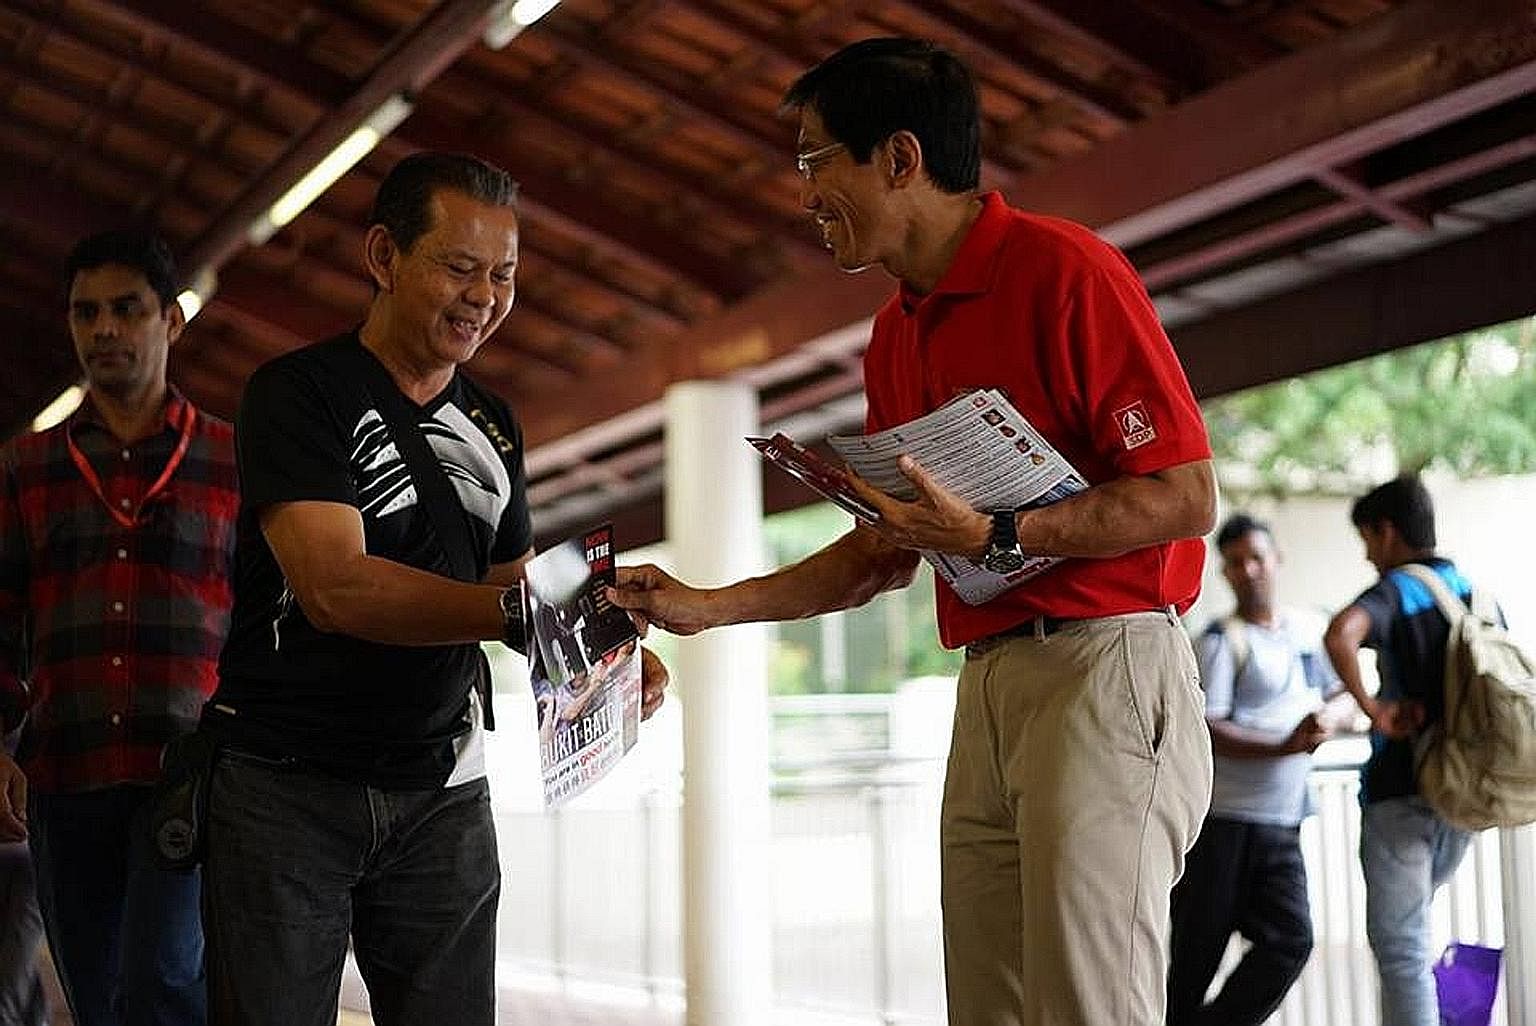 Dr Chee Soon Juan, SDP's candidate for the Bukit Batok by-election, greeting a resident near Bukit Batok MRT station. He spent the Nomination Day eve distributing fliers and greeting commuters at the station.